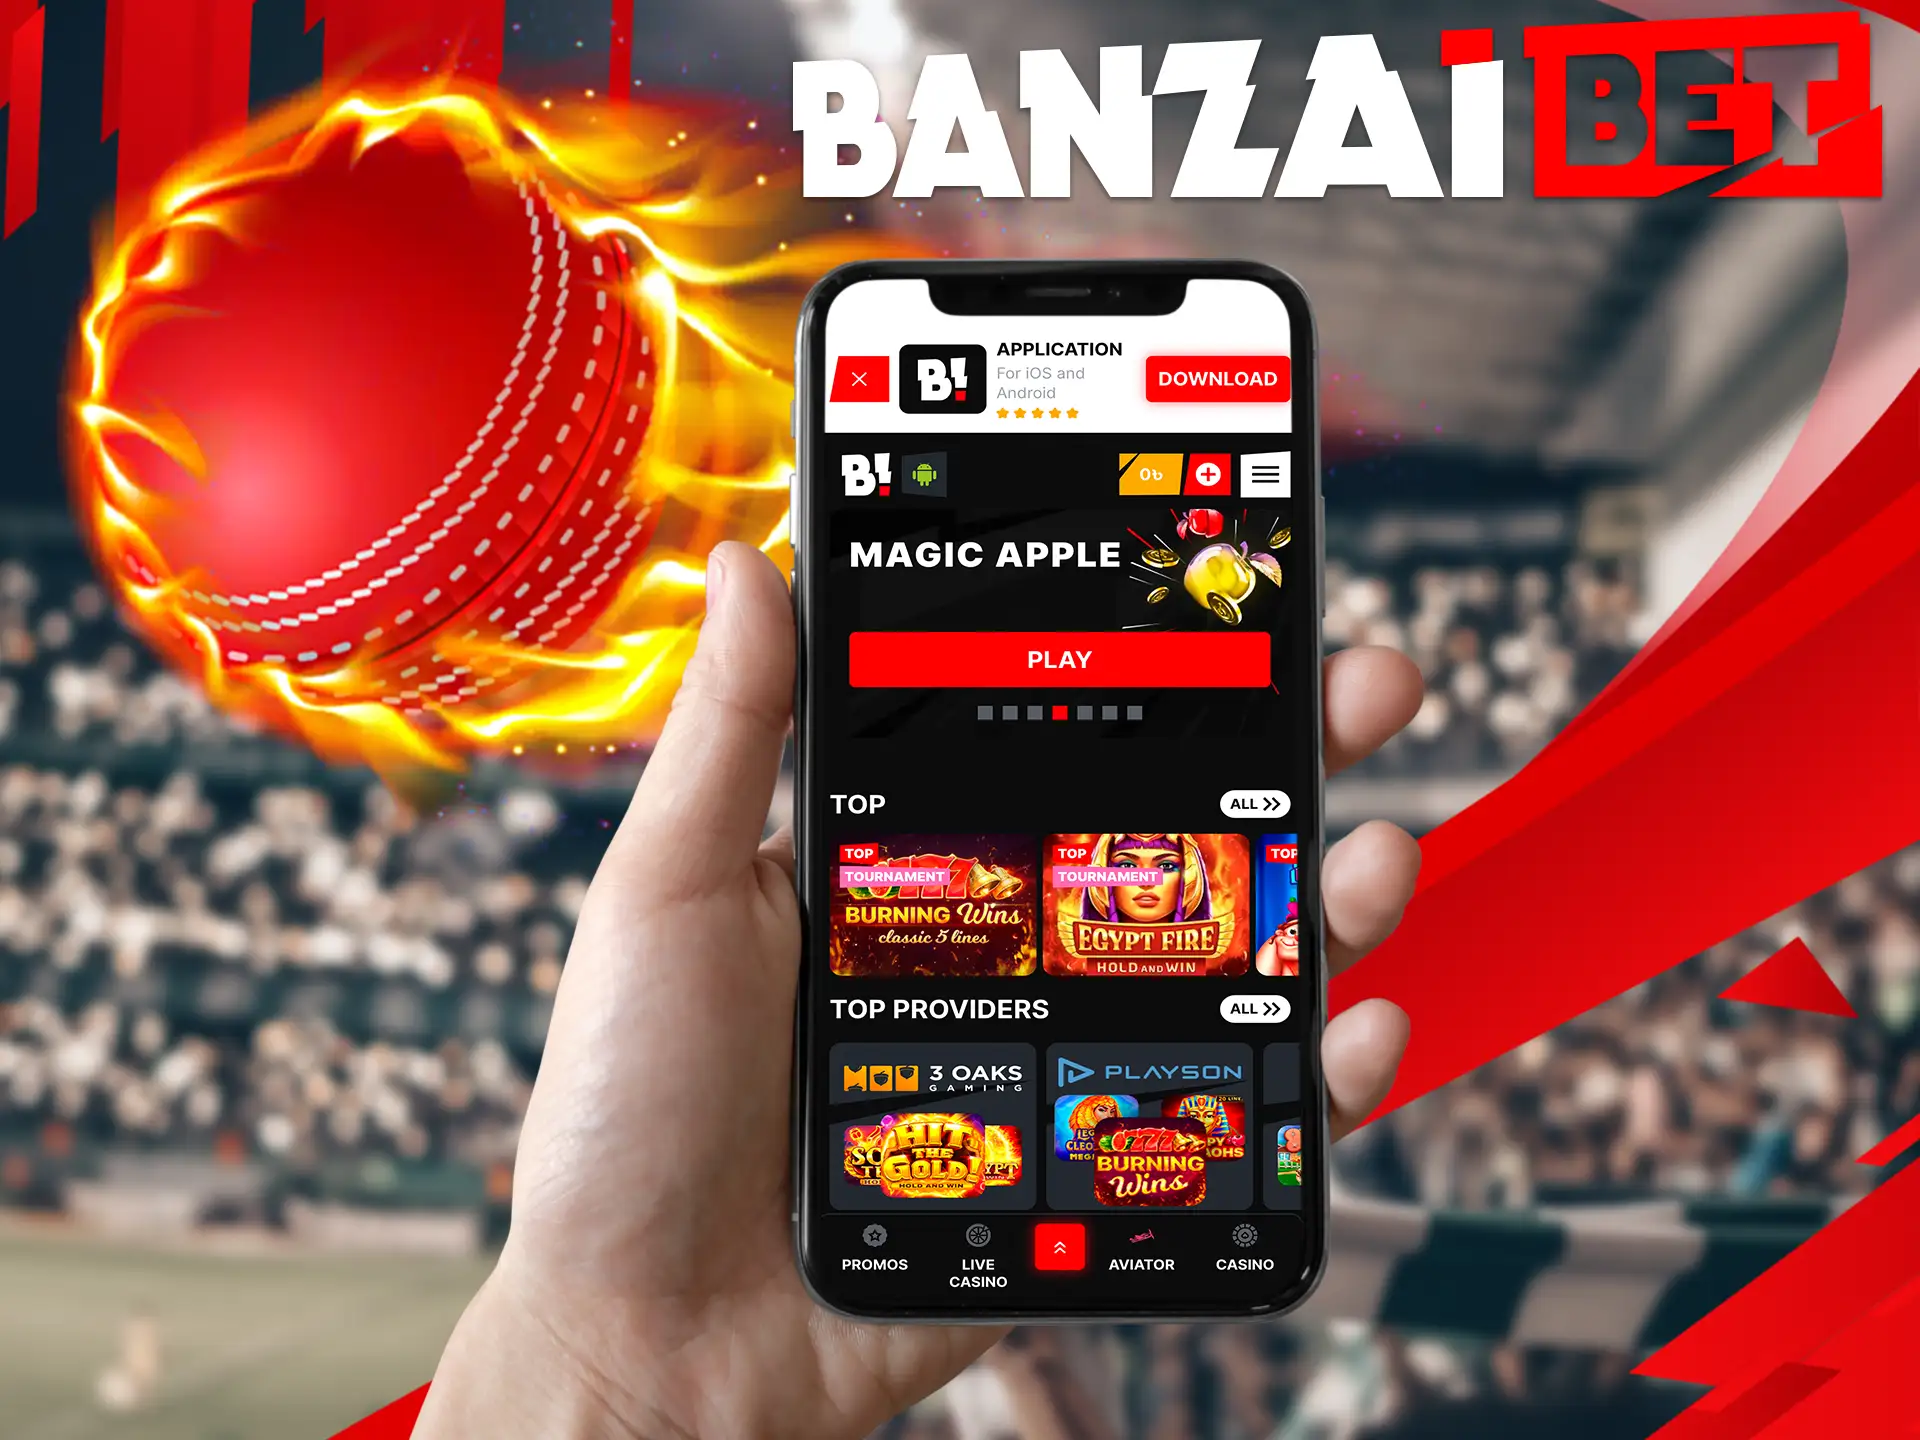 Many users do not know how to start the betting process, they just need to register and fund their Banzai Bet account and you are already in the game.